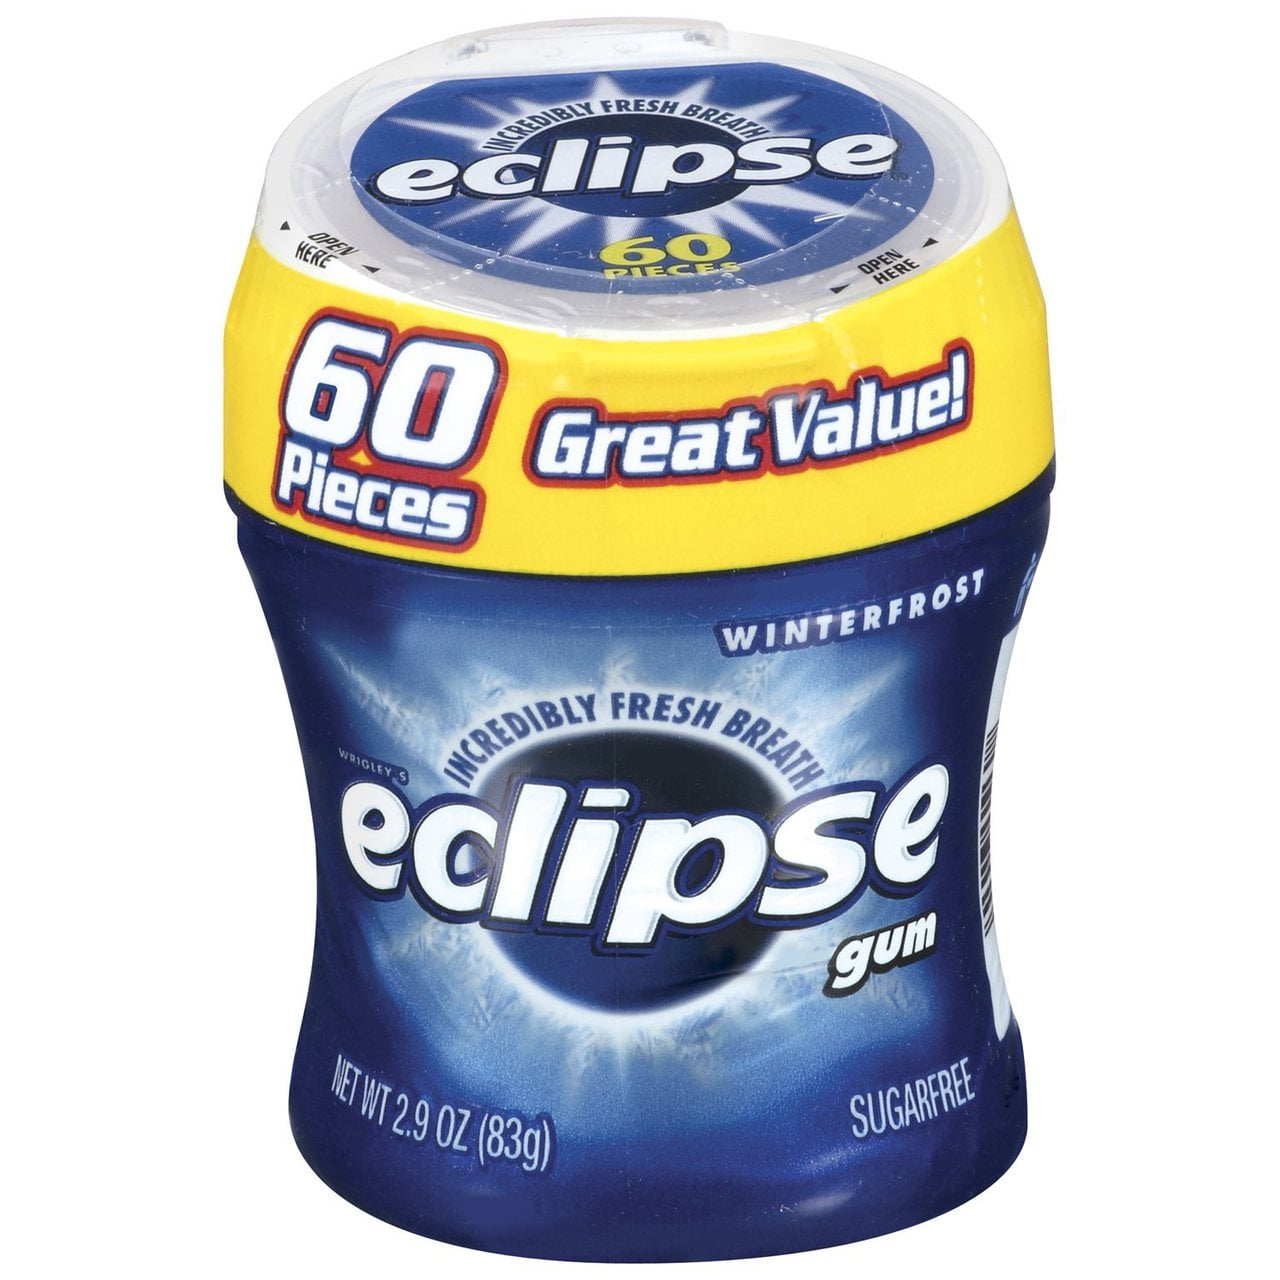 Eclipse Big E Gum Variety Pack - 4 pack, 60 pieces each